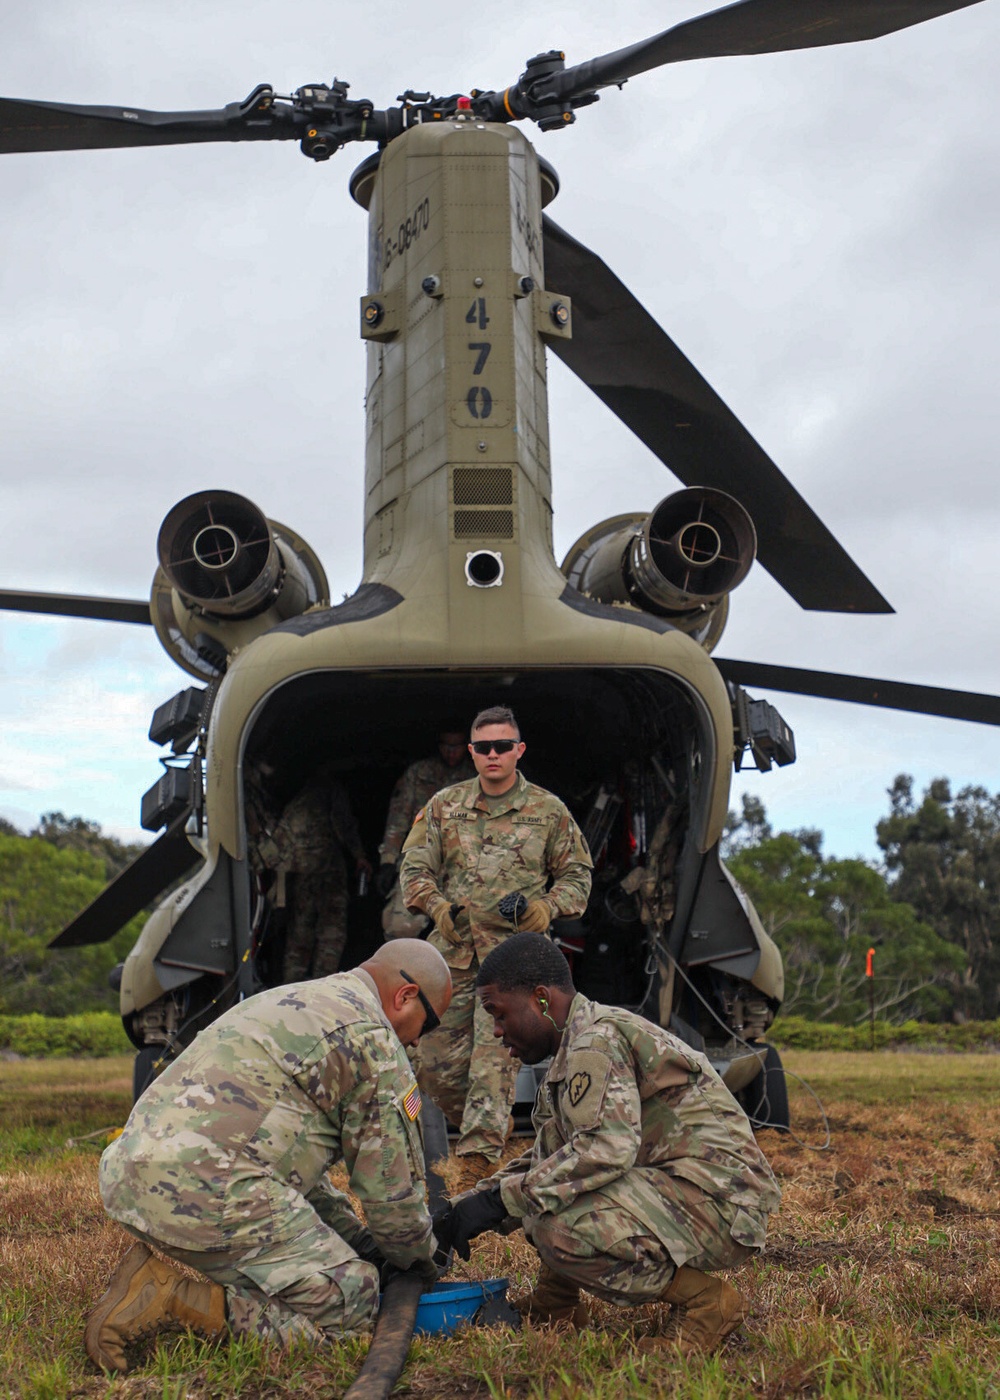 Aviation Brigade practices “Fat Cow” fueling operation